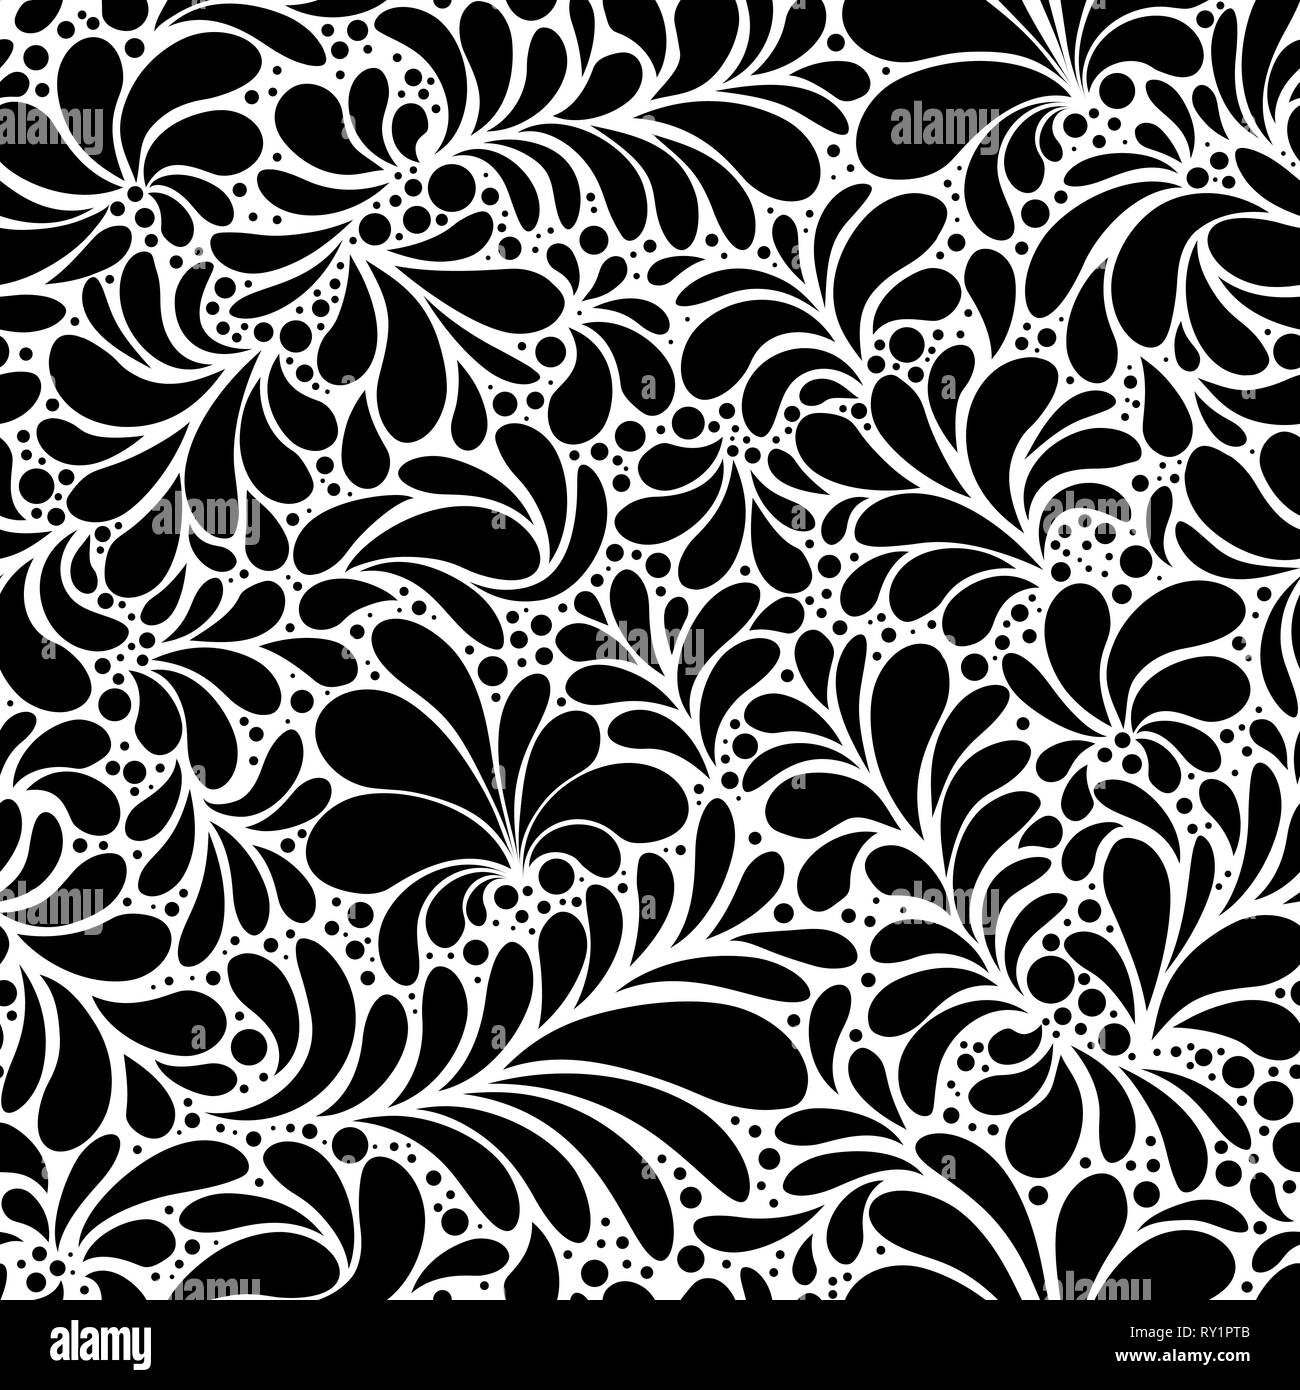 Paisley or Damask Black Floral Seamless Pattern, Vector Ornament. hand drawn seamless pattern. Damask silhouette texture. Floral teardrop motif. Vintage ornate background. Textile, wallpaper Stock Vector